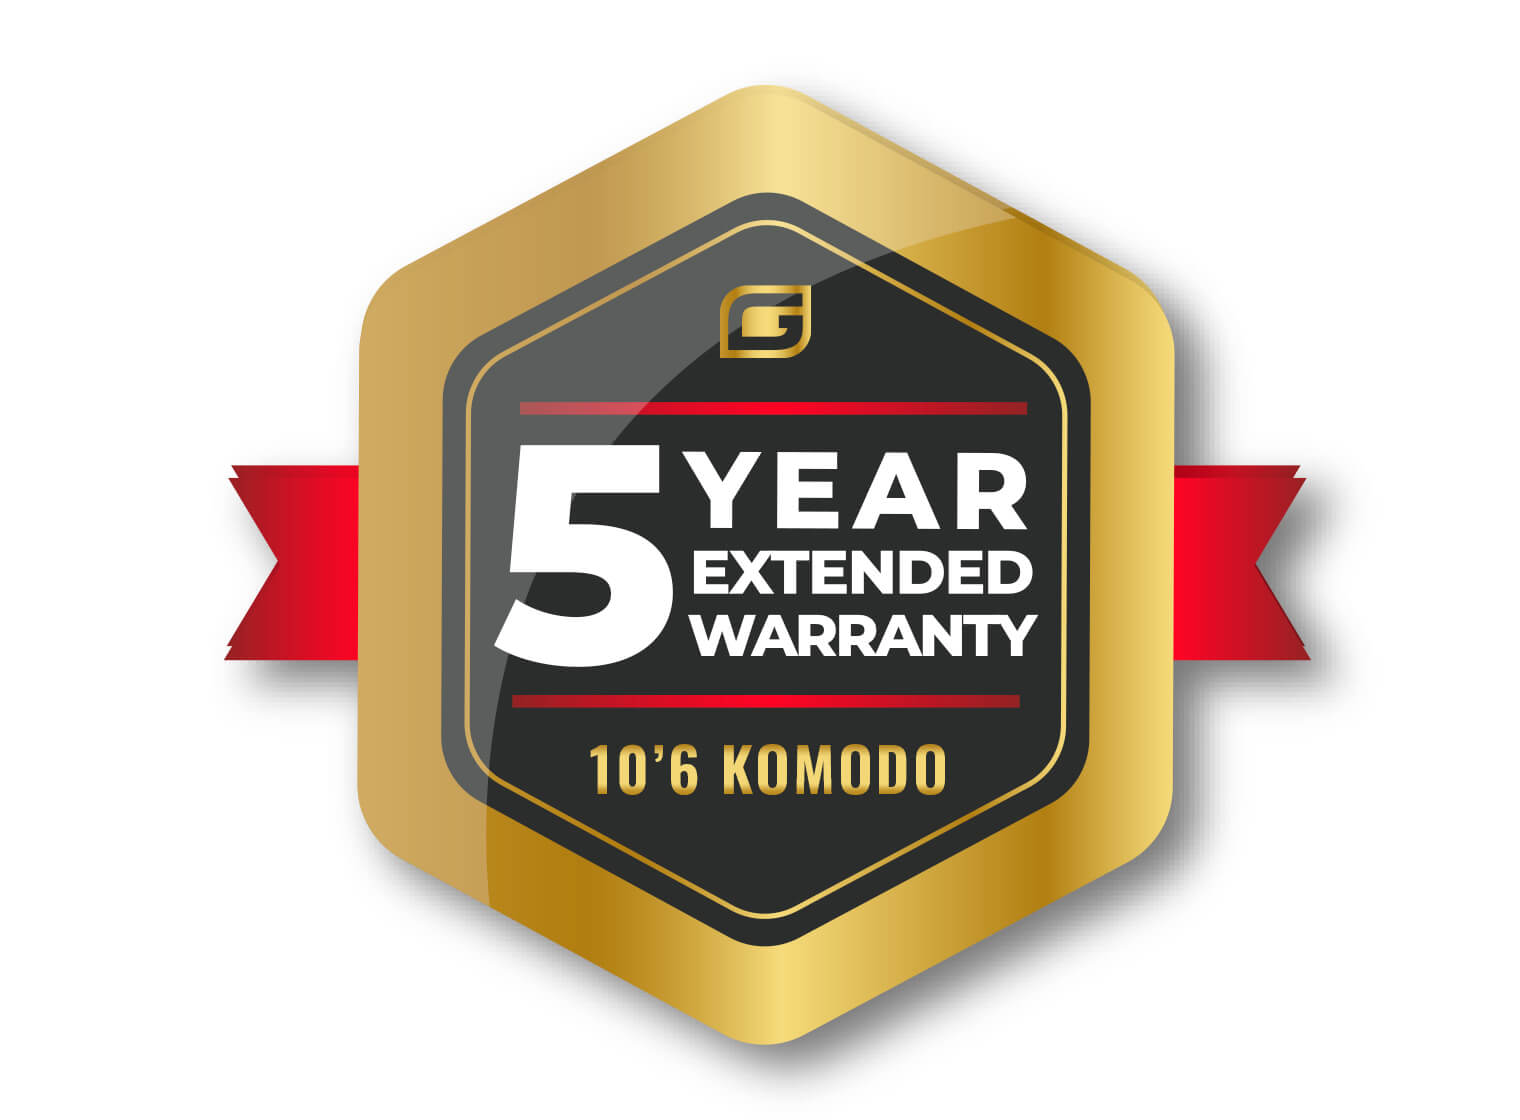 GILI 5 year extended warranty for Komodo paddle board